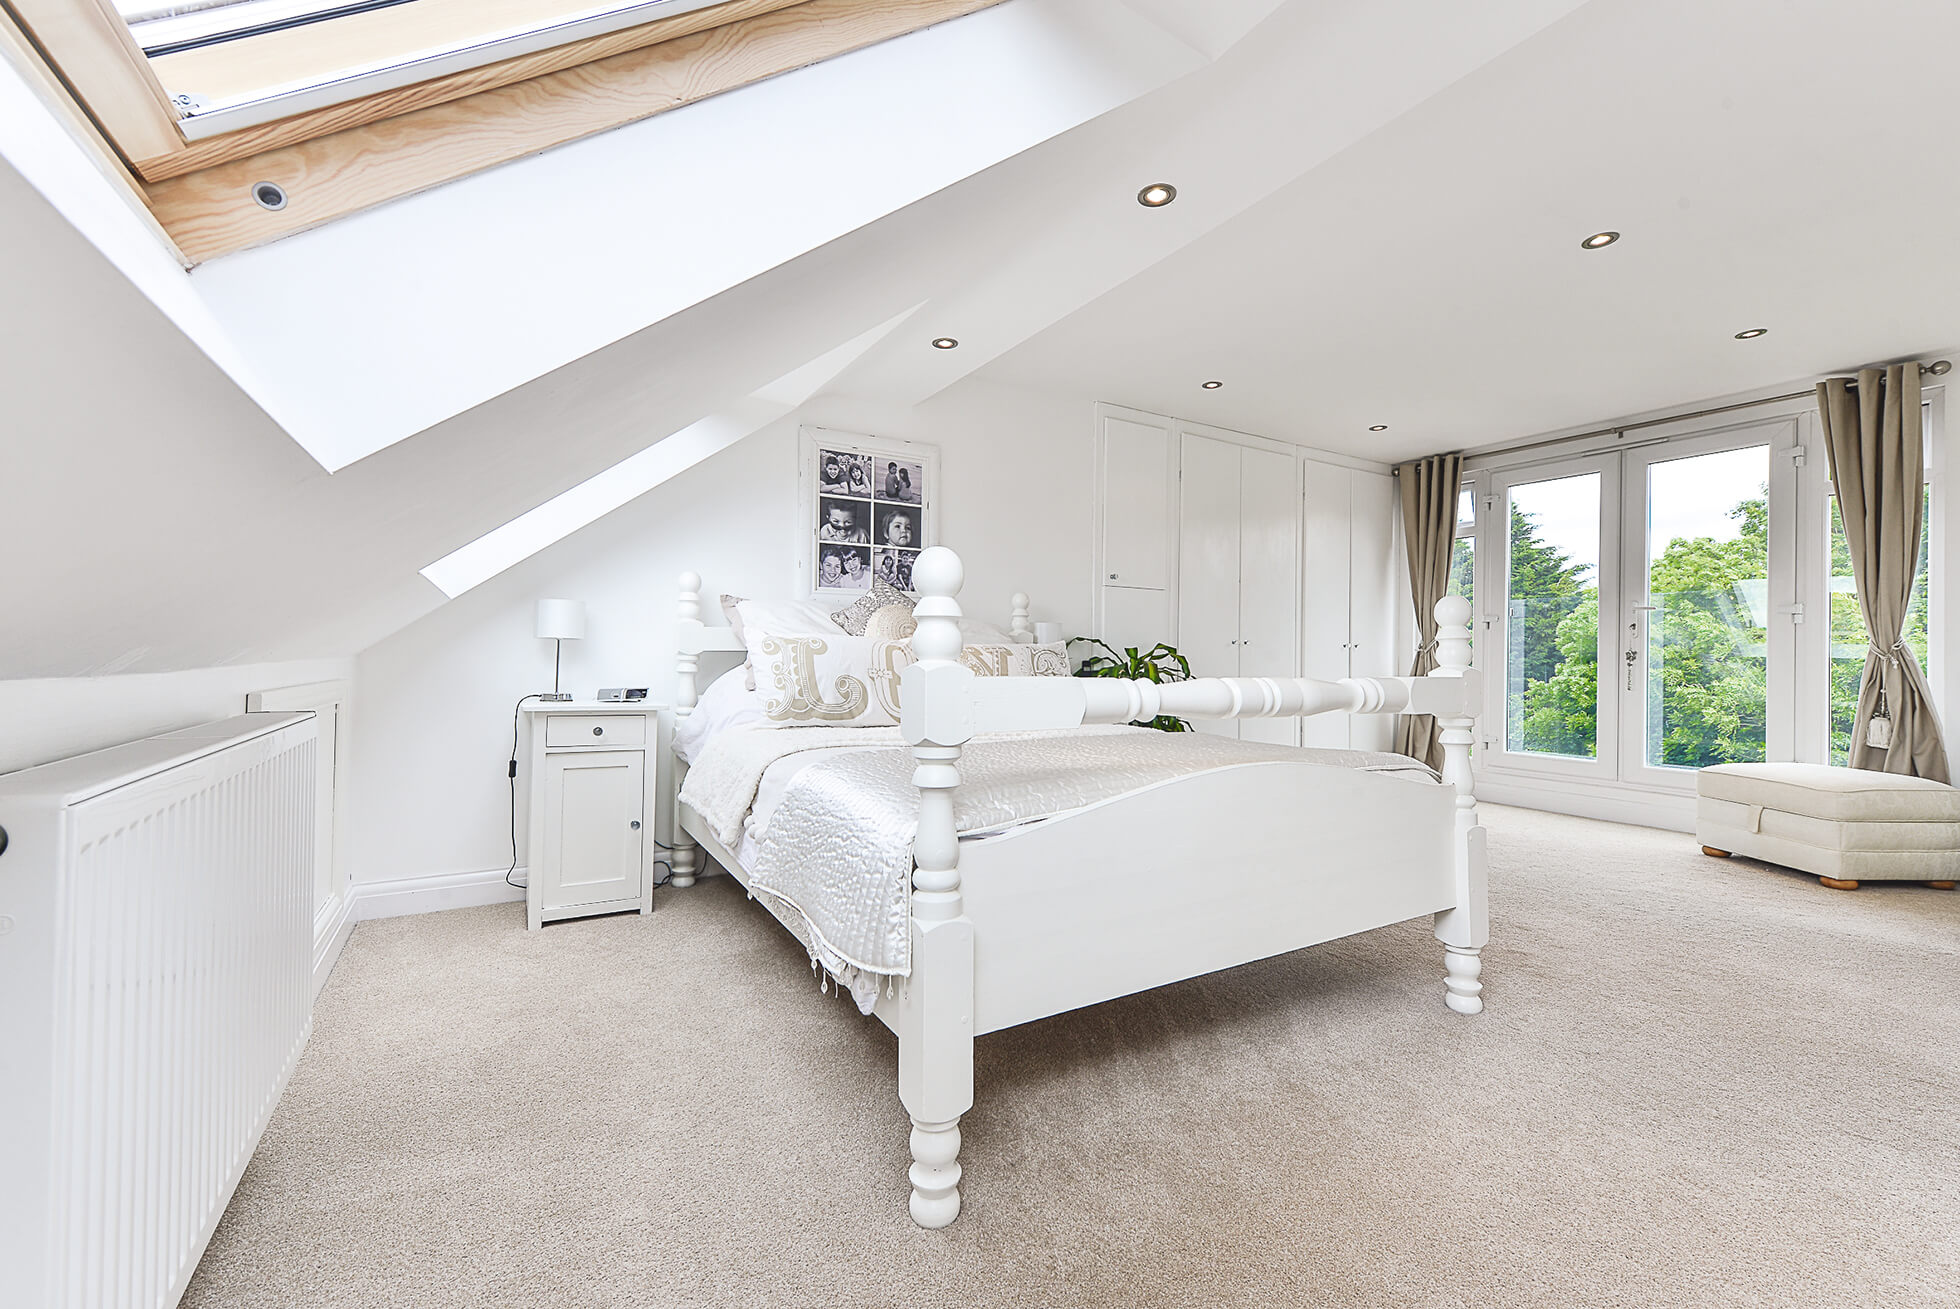 Do you have a question about converting your Loft in Whitwell? Here are the most popular questions asked by our clients.